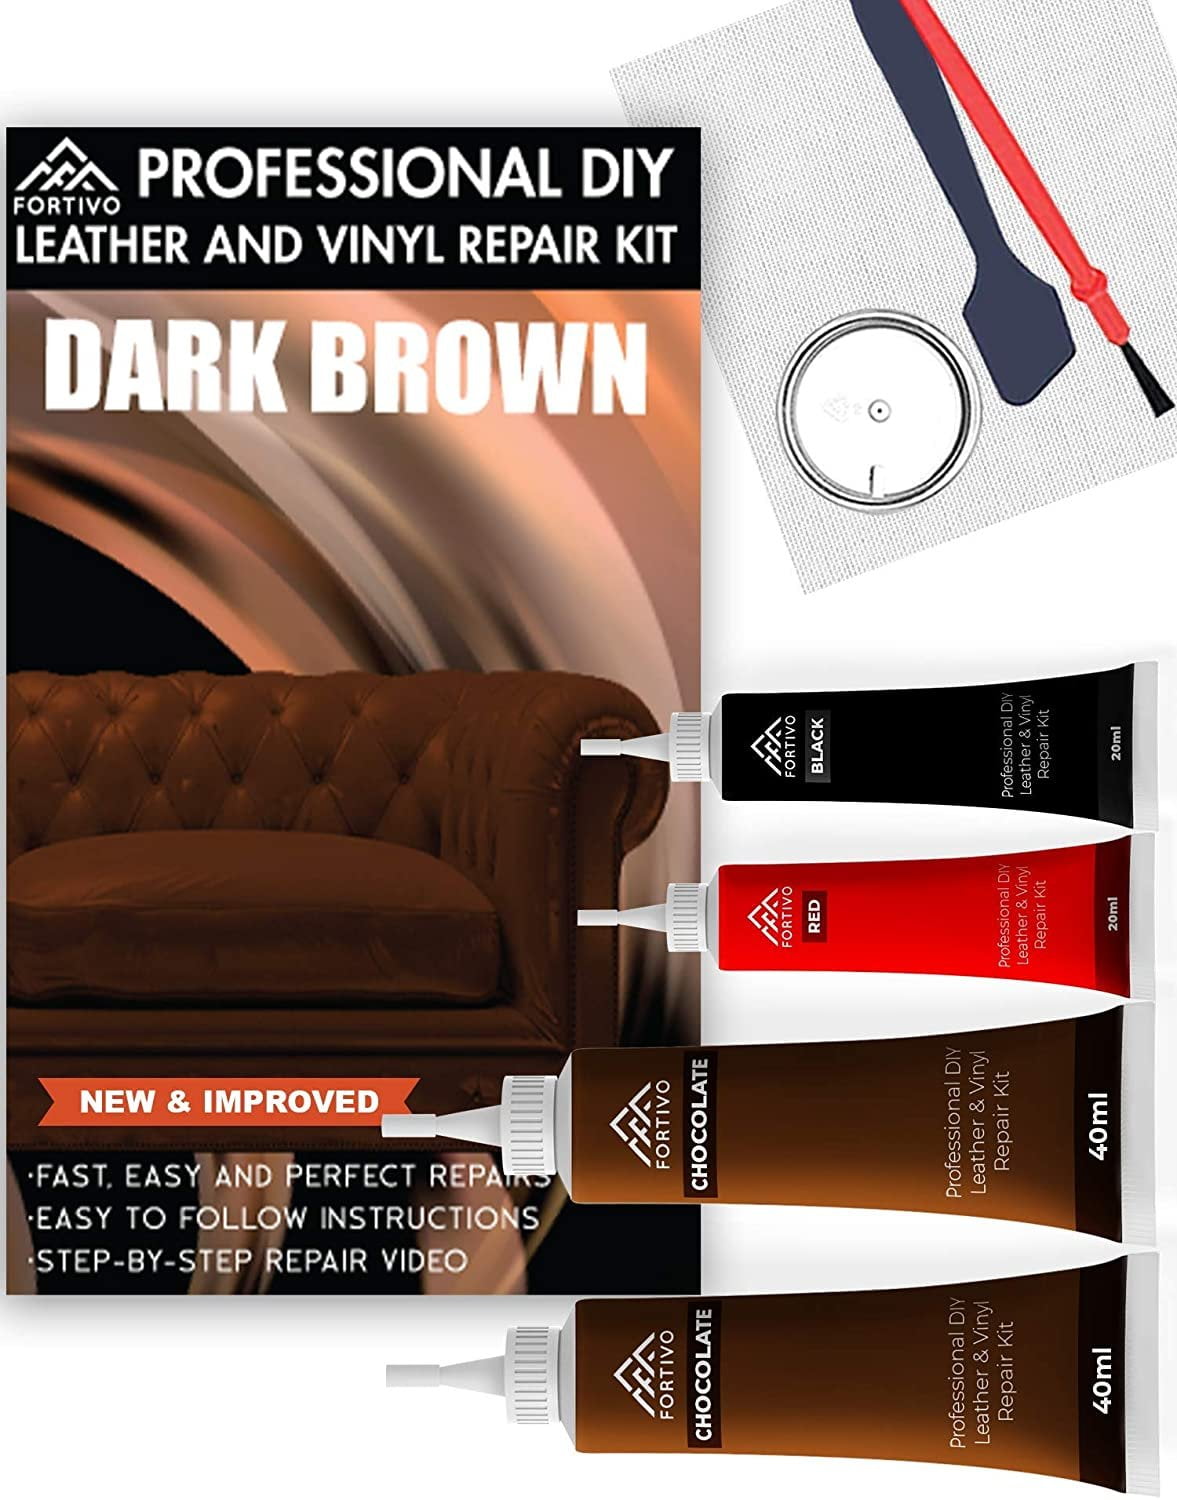 Pelle Patch - Dark Brown Leather Repair Kit for Couches - Vinyl Seat Repair  Kit Marine - Leather Furniture